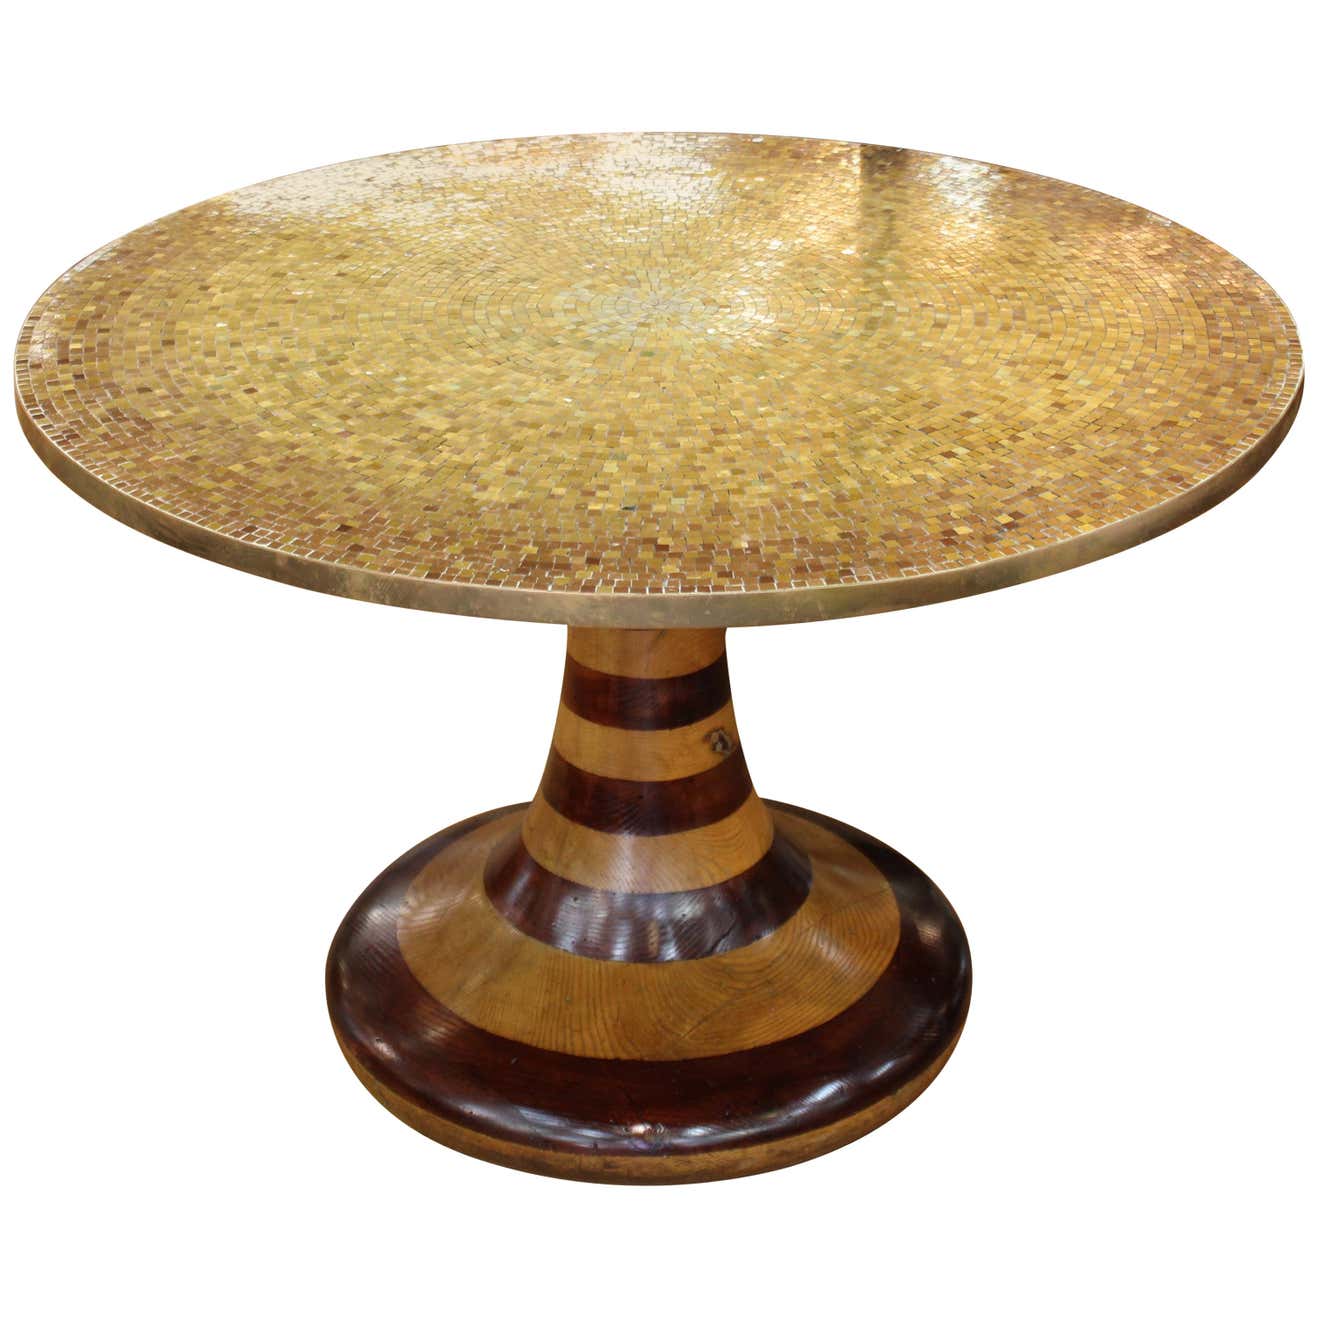 WENDELL CASTLE STYLE TABLE W GOLD